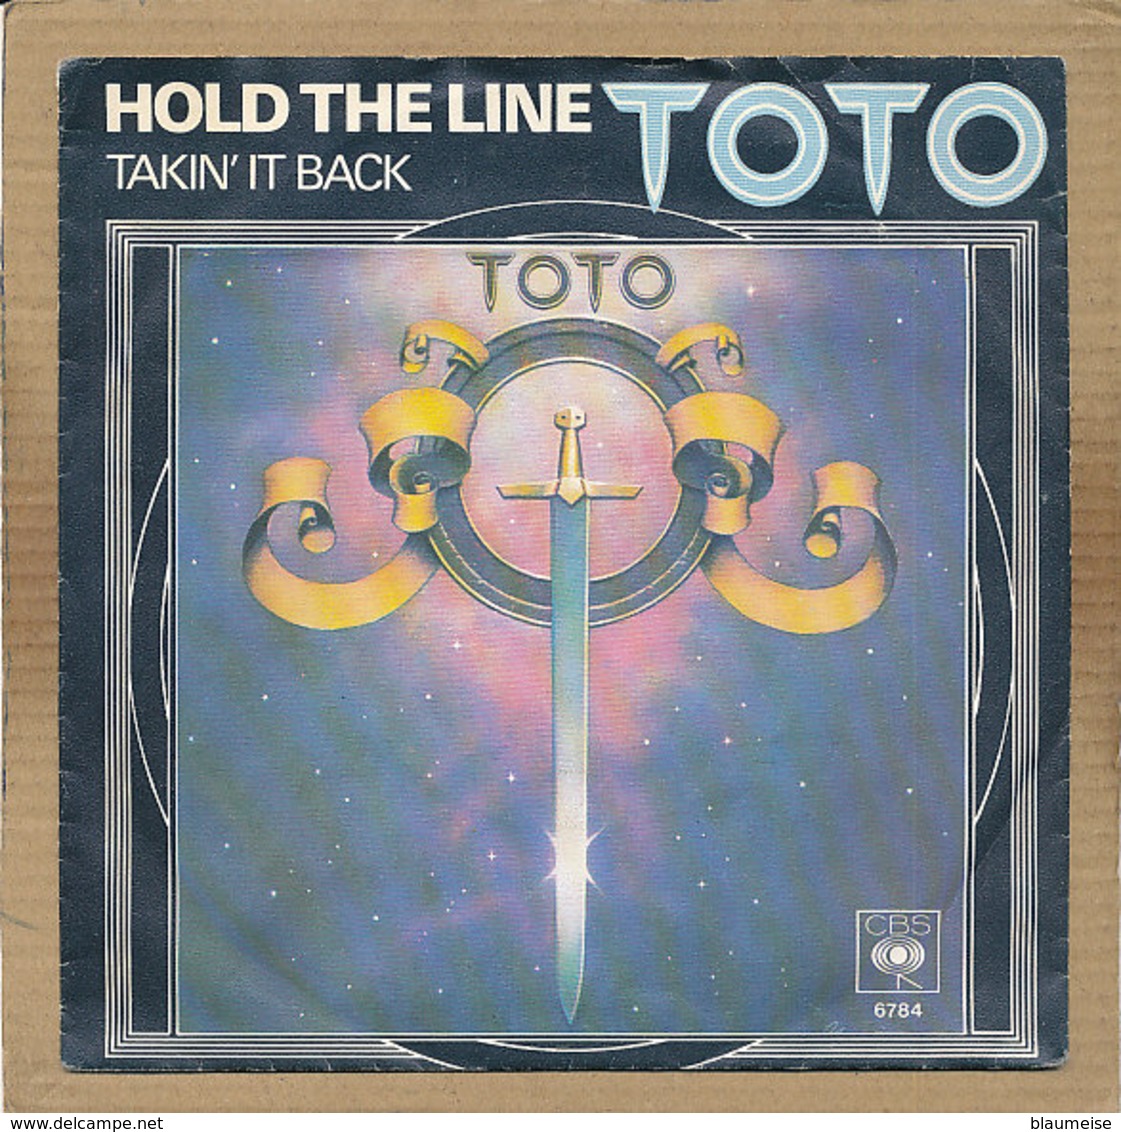 7" Single, Toto - Hold The Line - Disco, Pop